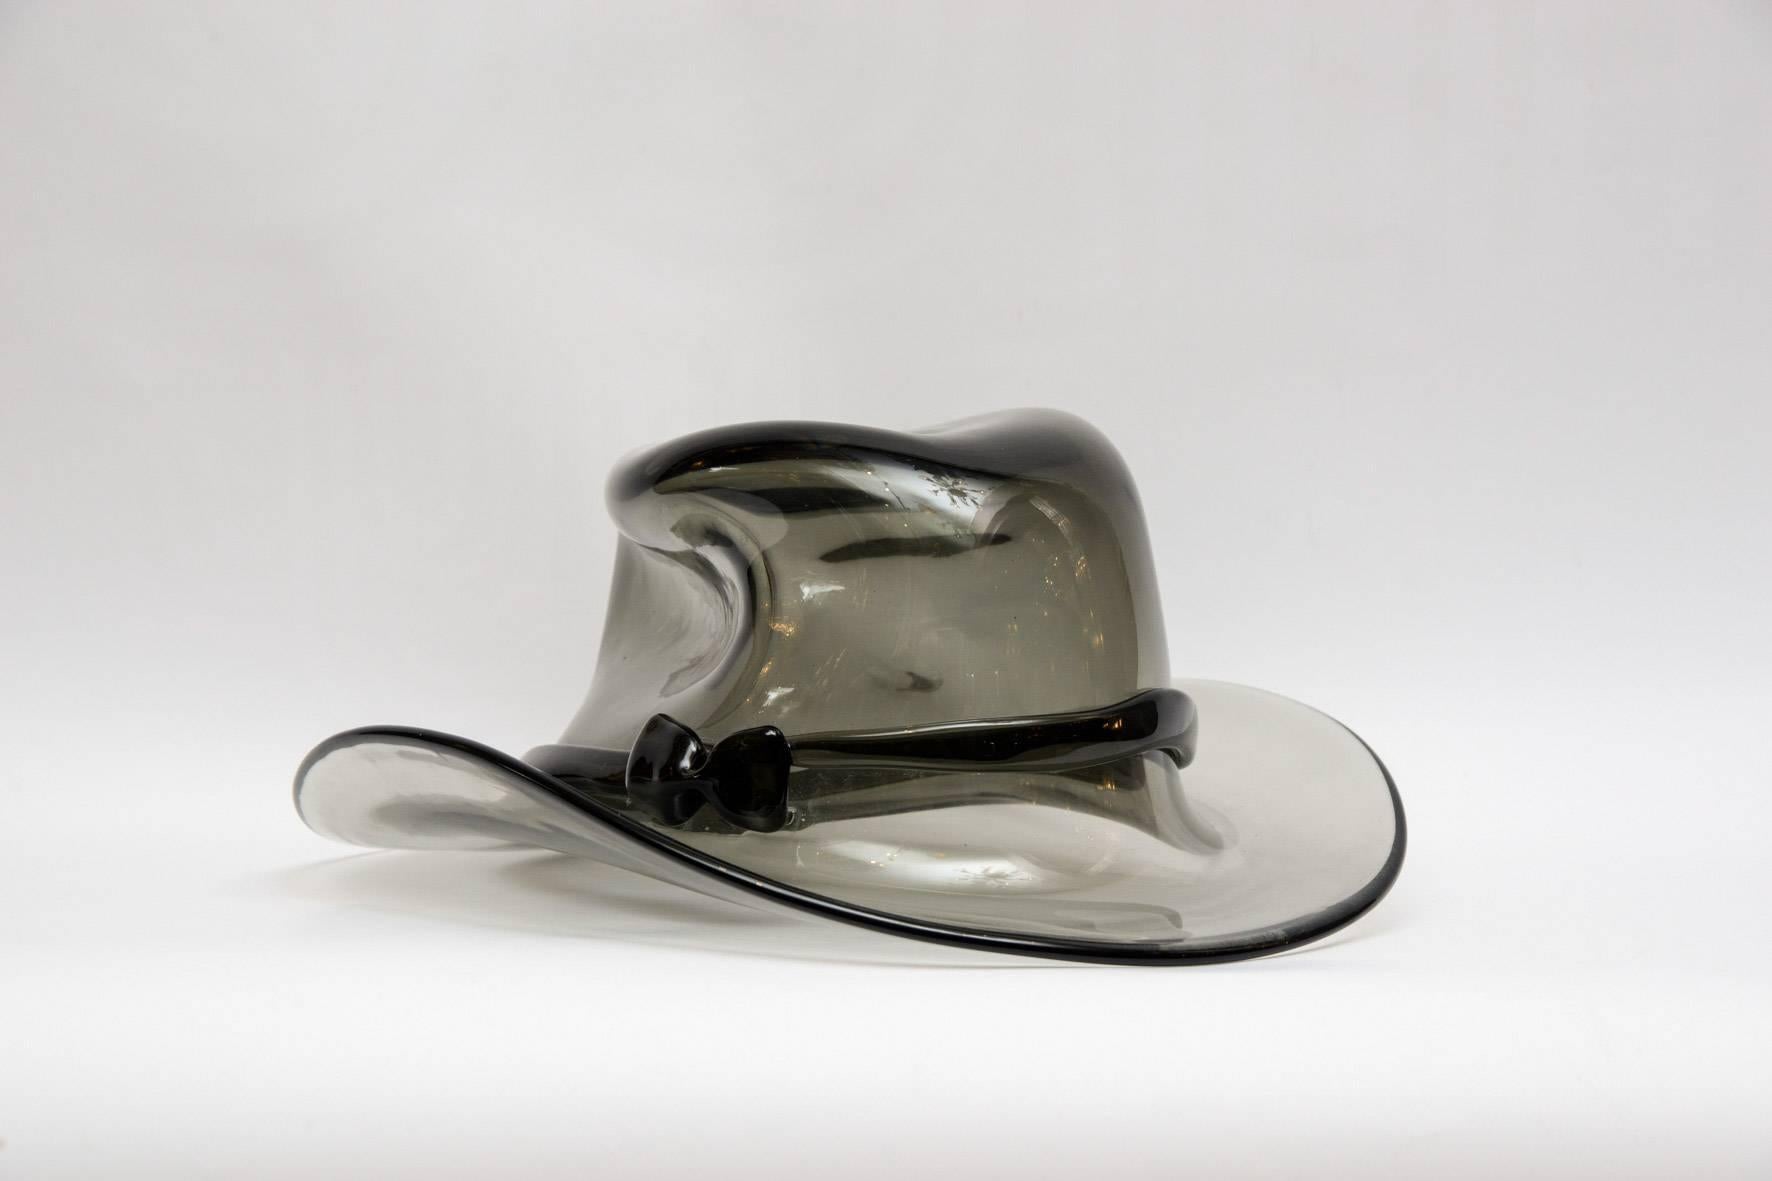 Funny hat in Murano glass.
Murano glass hat

Excellent condition
Italian provenance
Dated 2000
Dimensions : H 45.72 cm x W 35.56 cm x D 30.48 cm
1760.00.